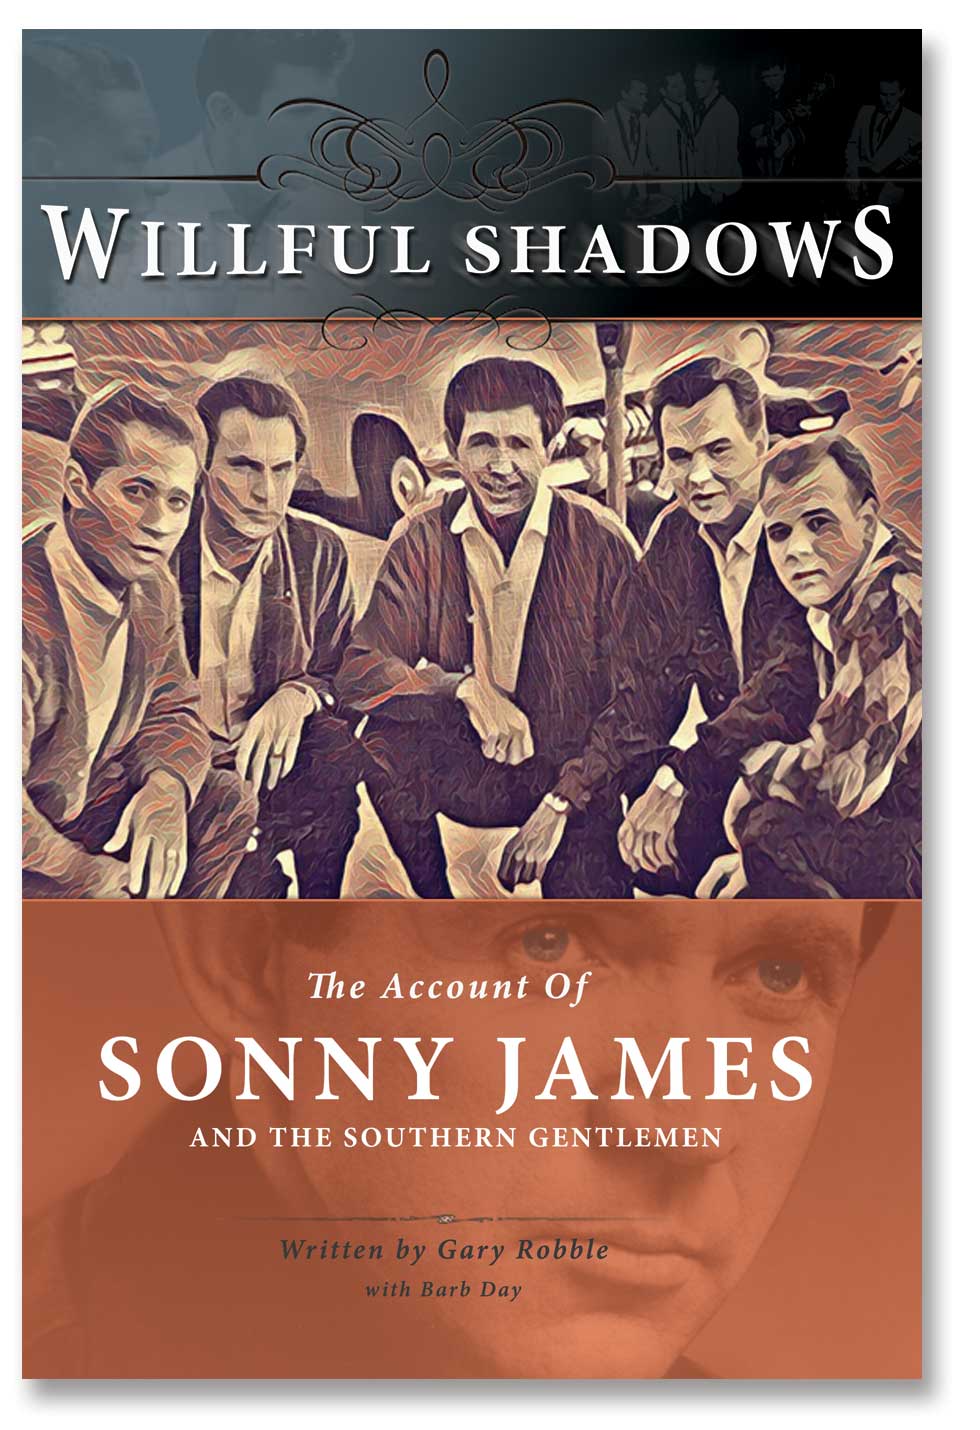 Willful Shadows book cover with image of Sonny and The Southern Gentlemen on a sidewalk